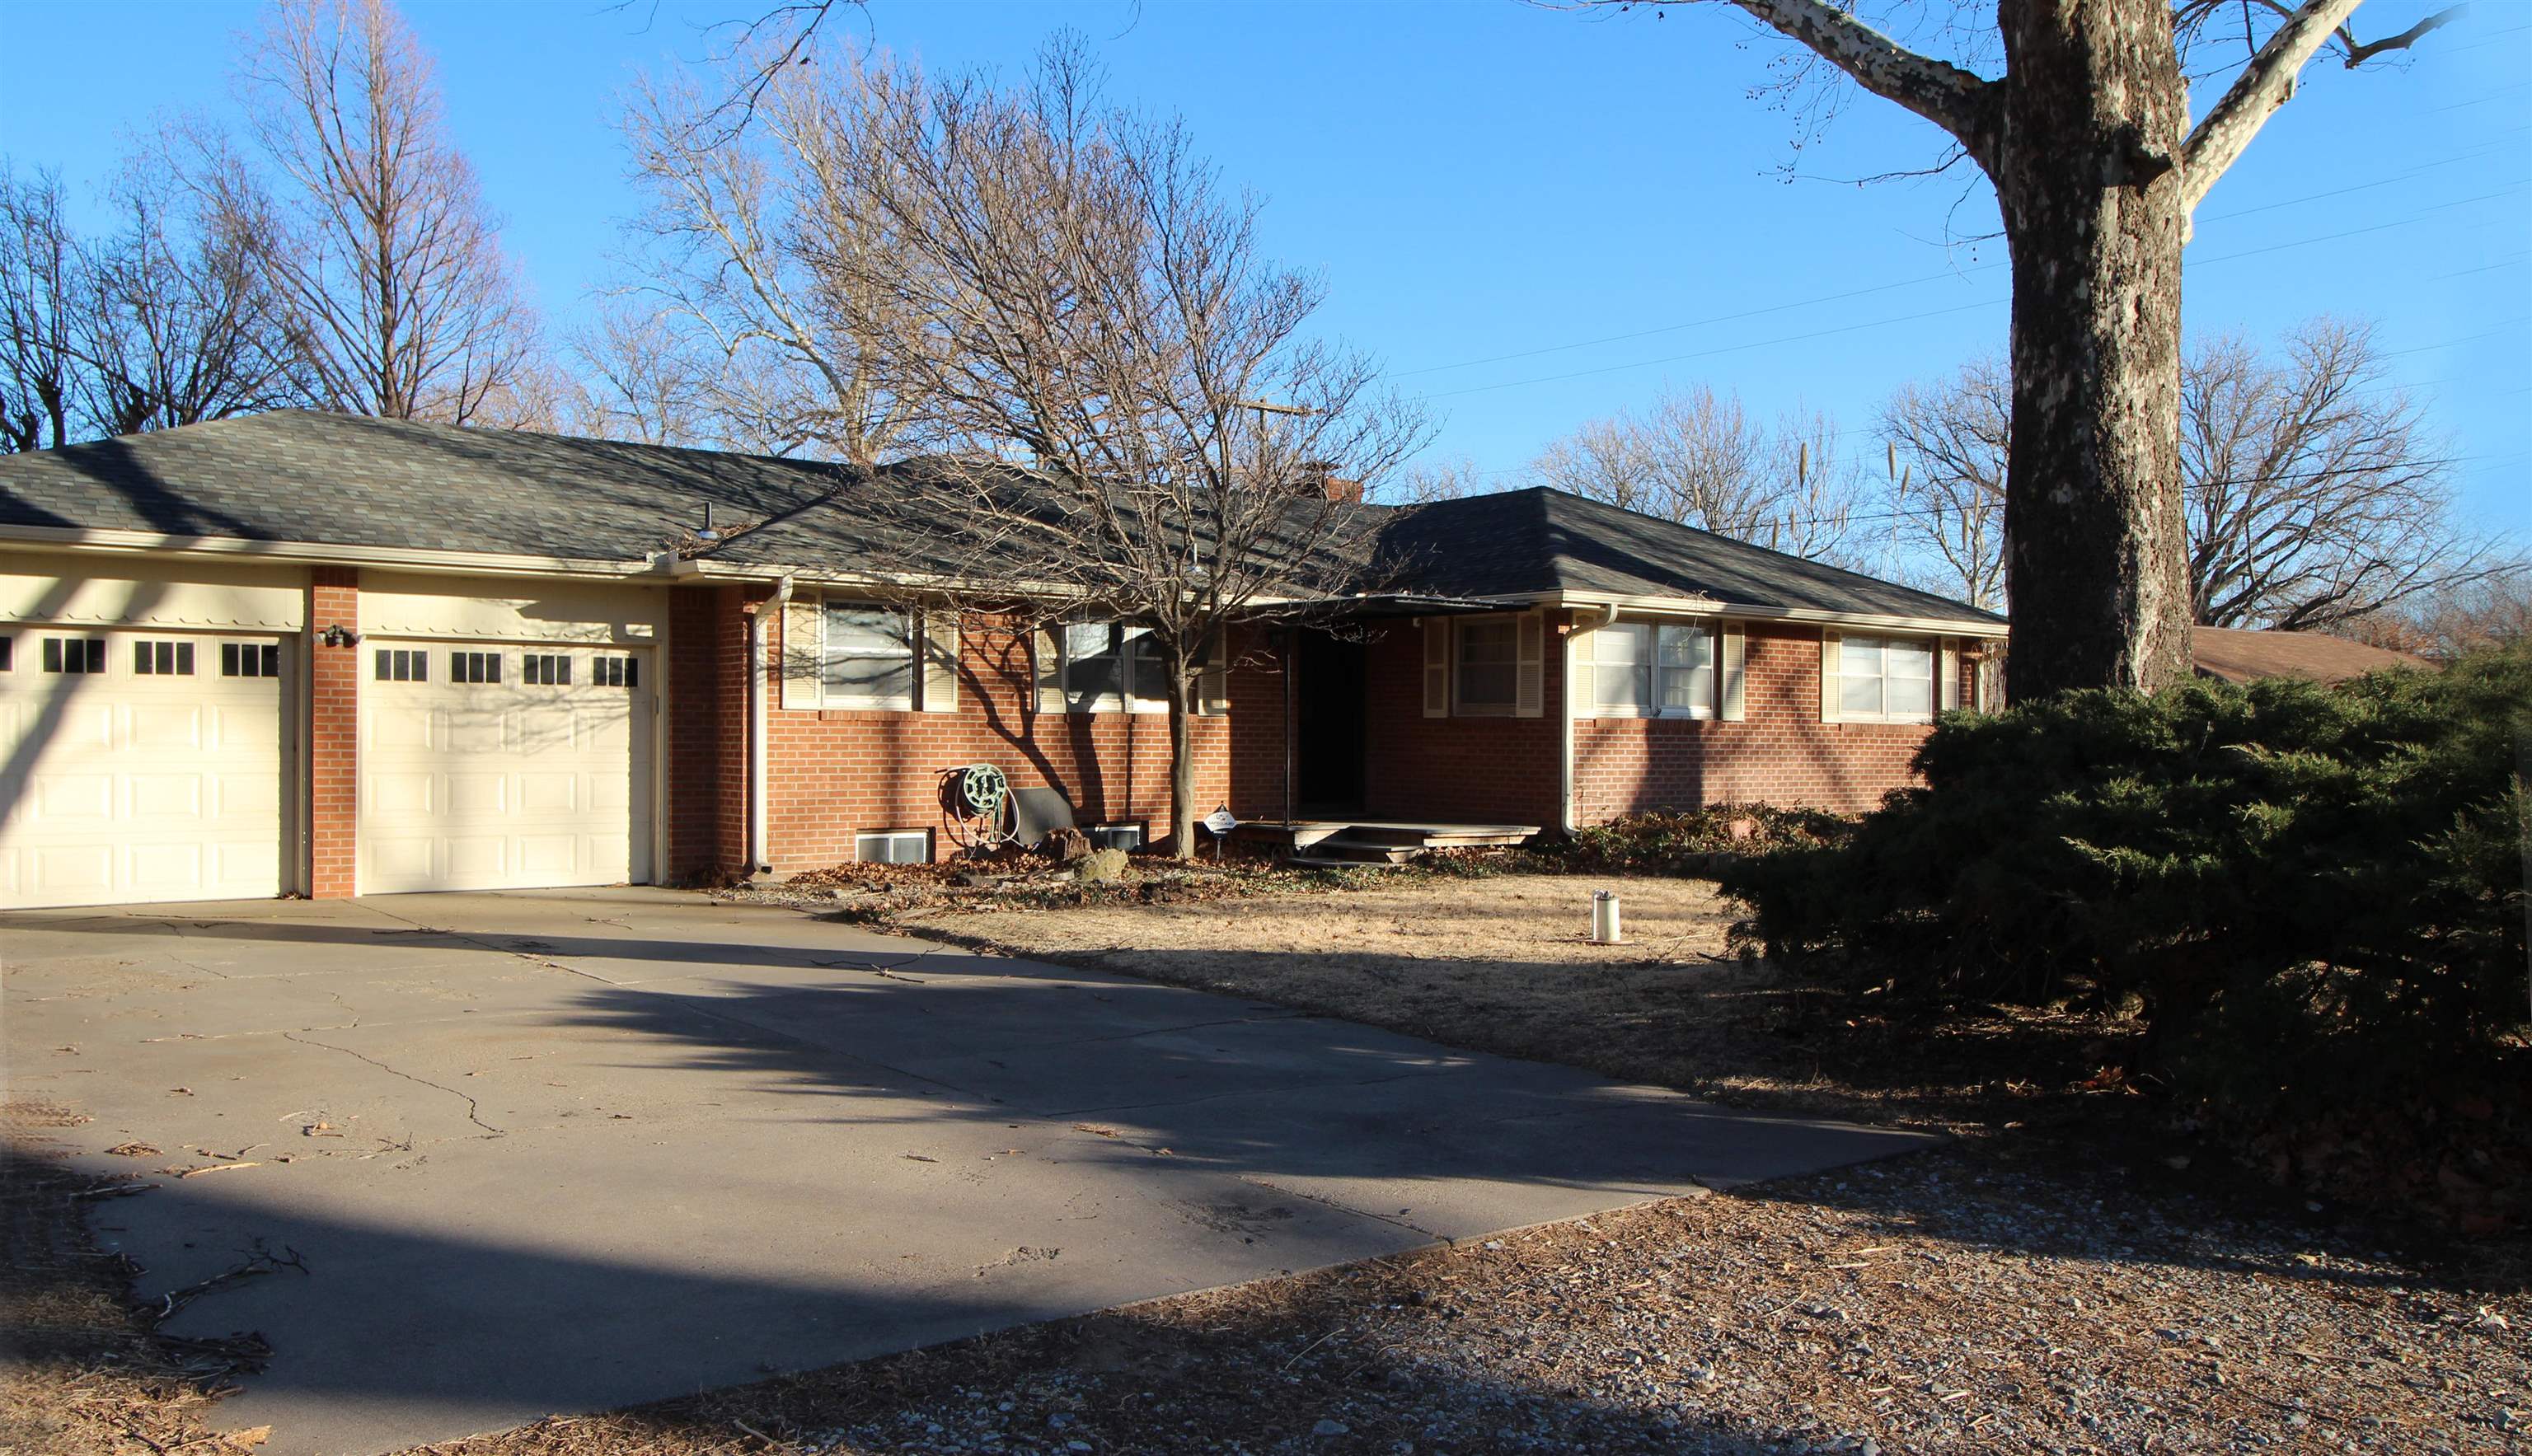 One owner brick home in desirable West Lynn add. Easy access to all of Wichita! Large fenced backyar